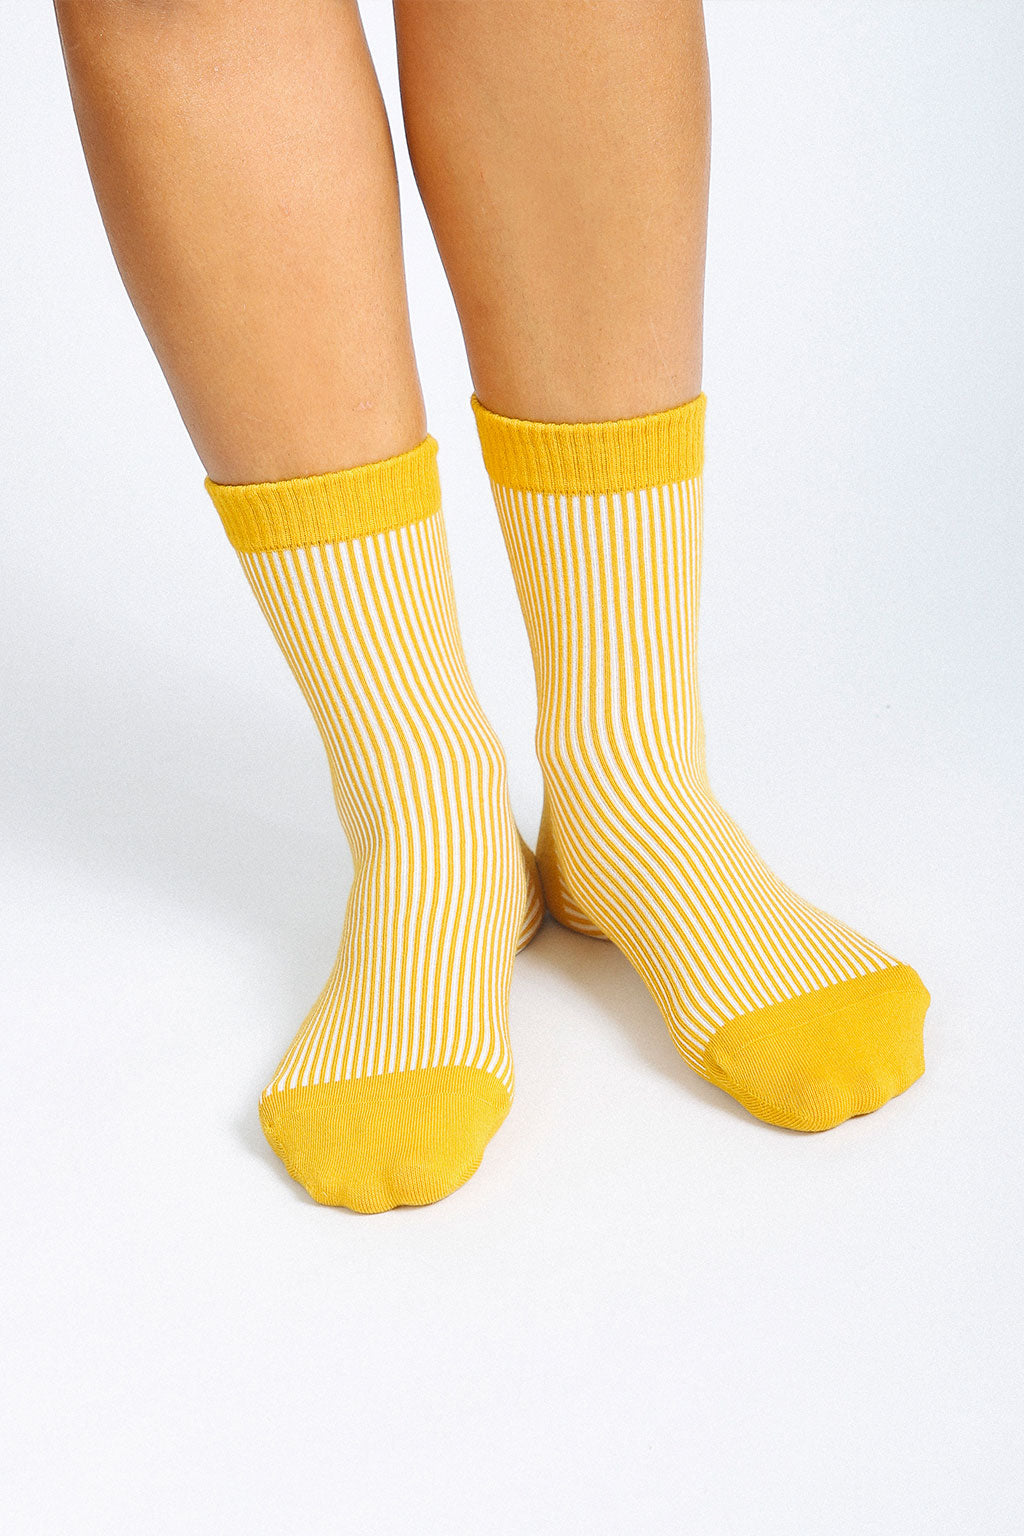 Tailored Union Daisy gold socks combed cotton